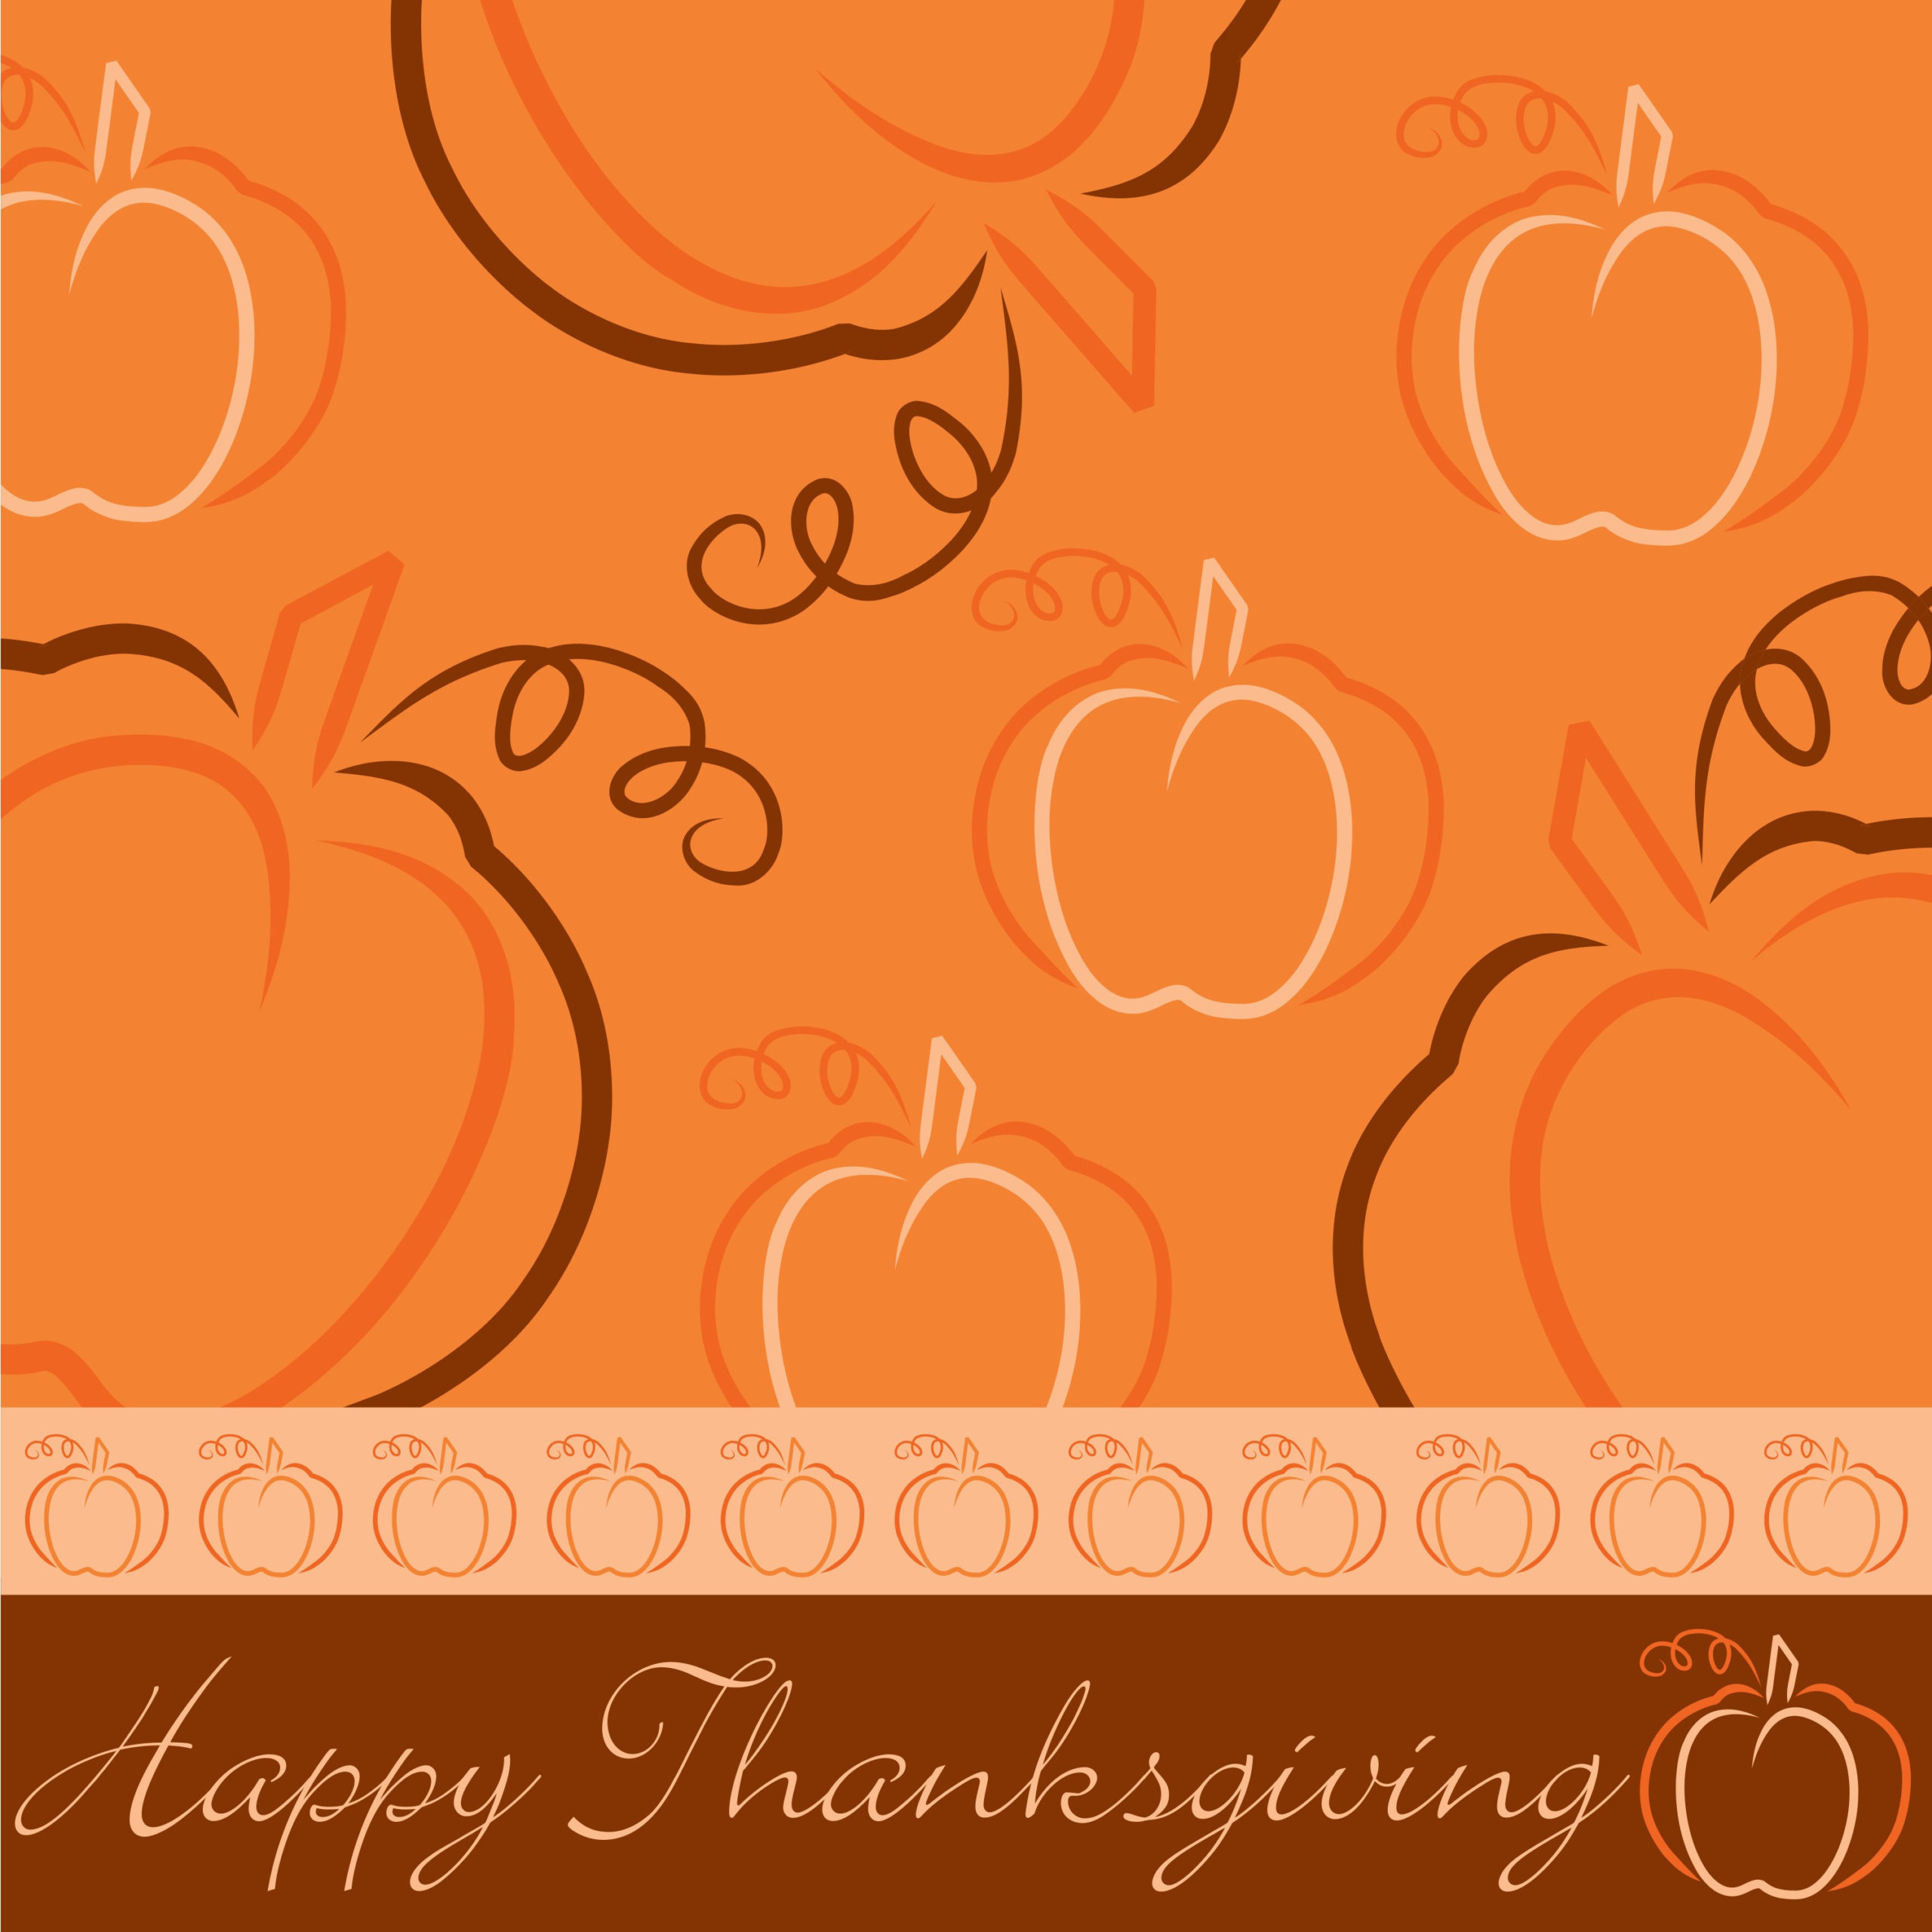 Celebrate Thanksgiving in Your Classroom Without Stress: Connecting Your Lessons to Social-Emotional Learning